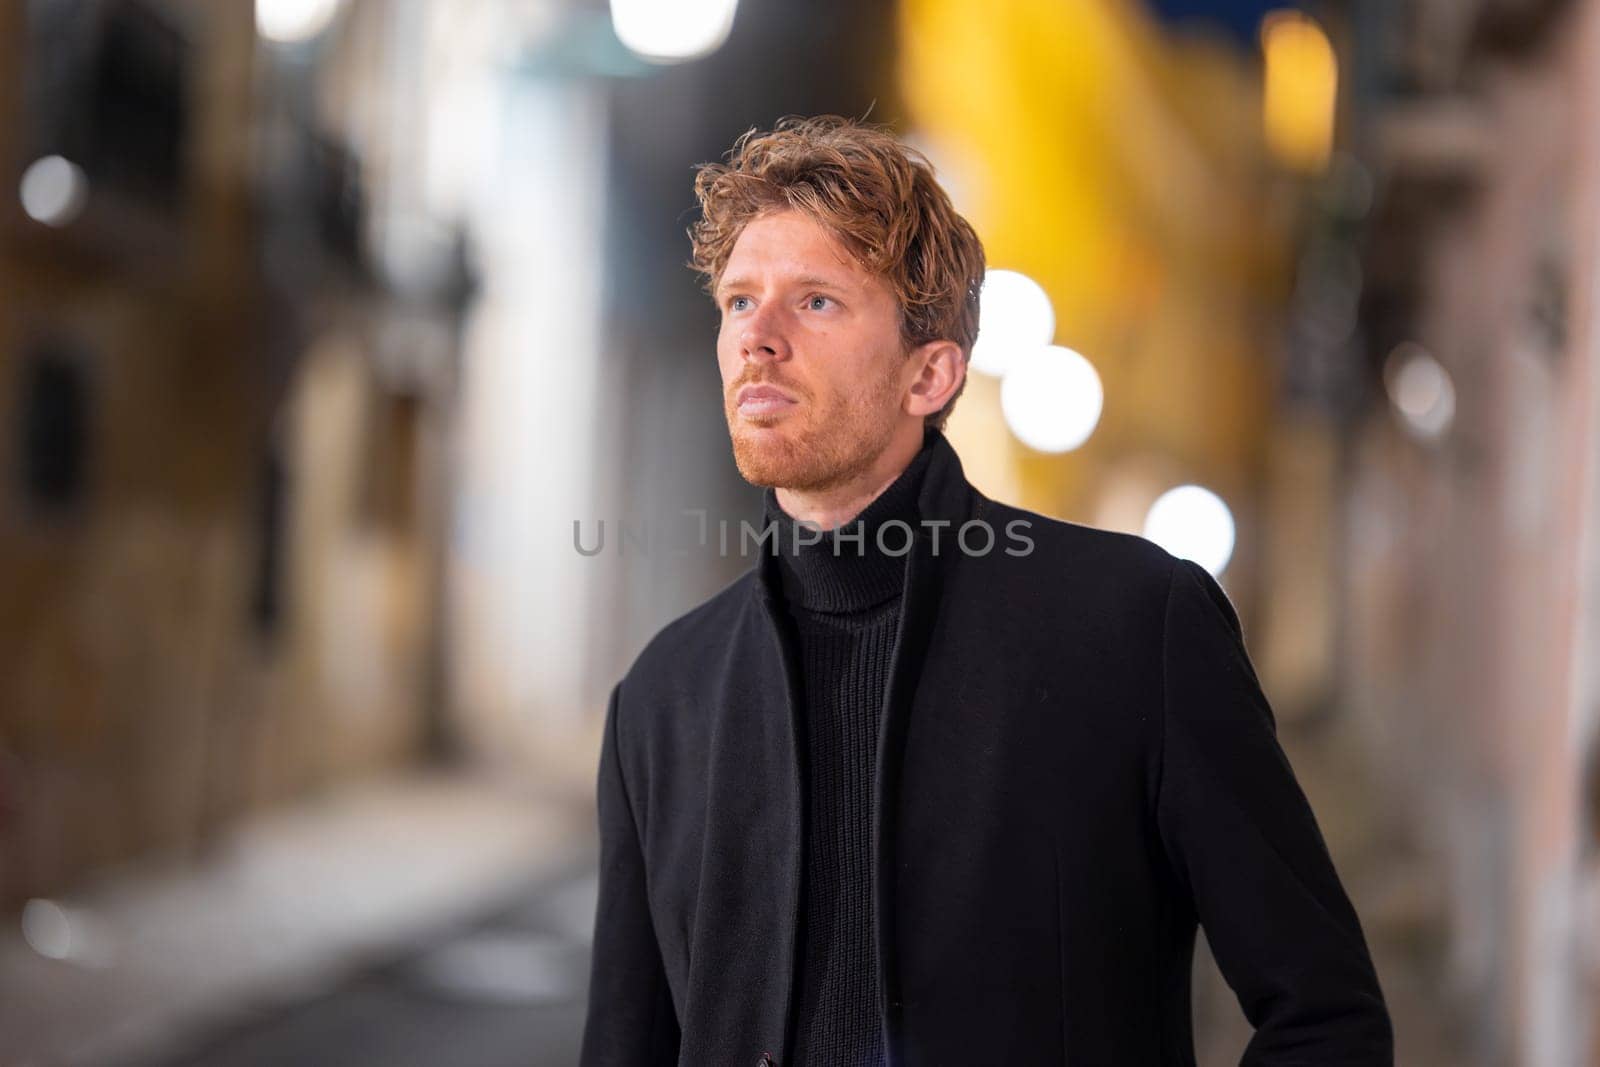 A man with red hair is standing in a city street at night. He is wearing a black coat and scarf